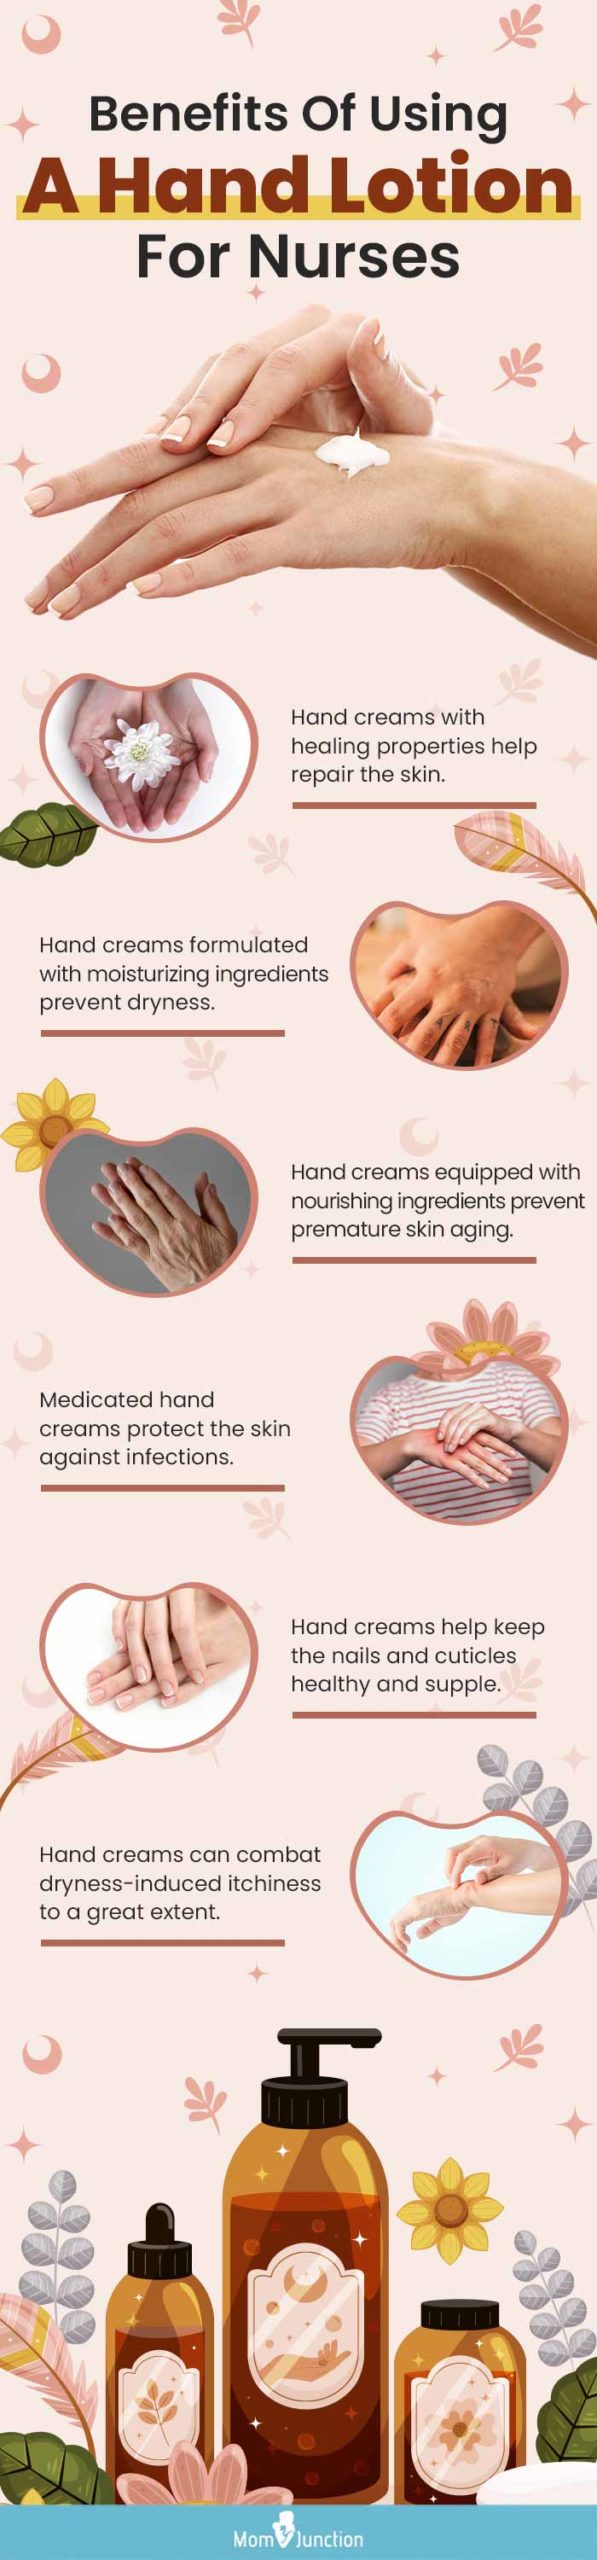 Benefits Of Using A Hand Lotion For Nurses (infographic)